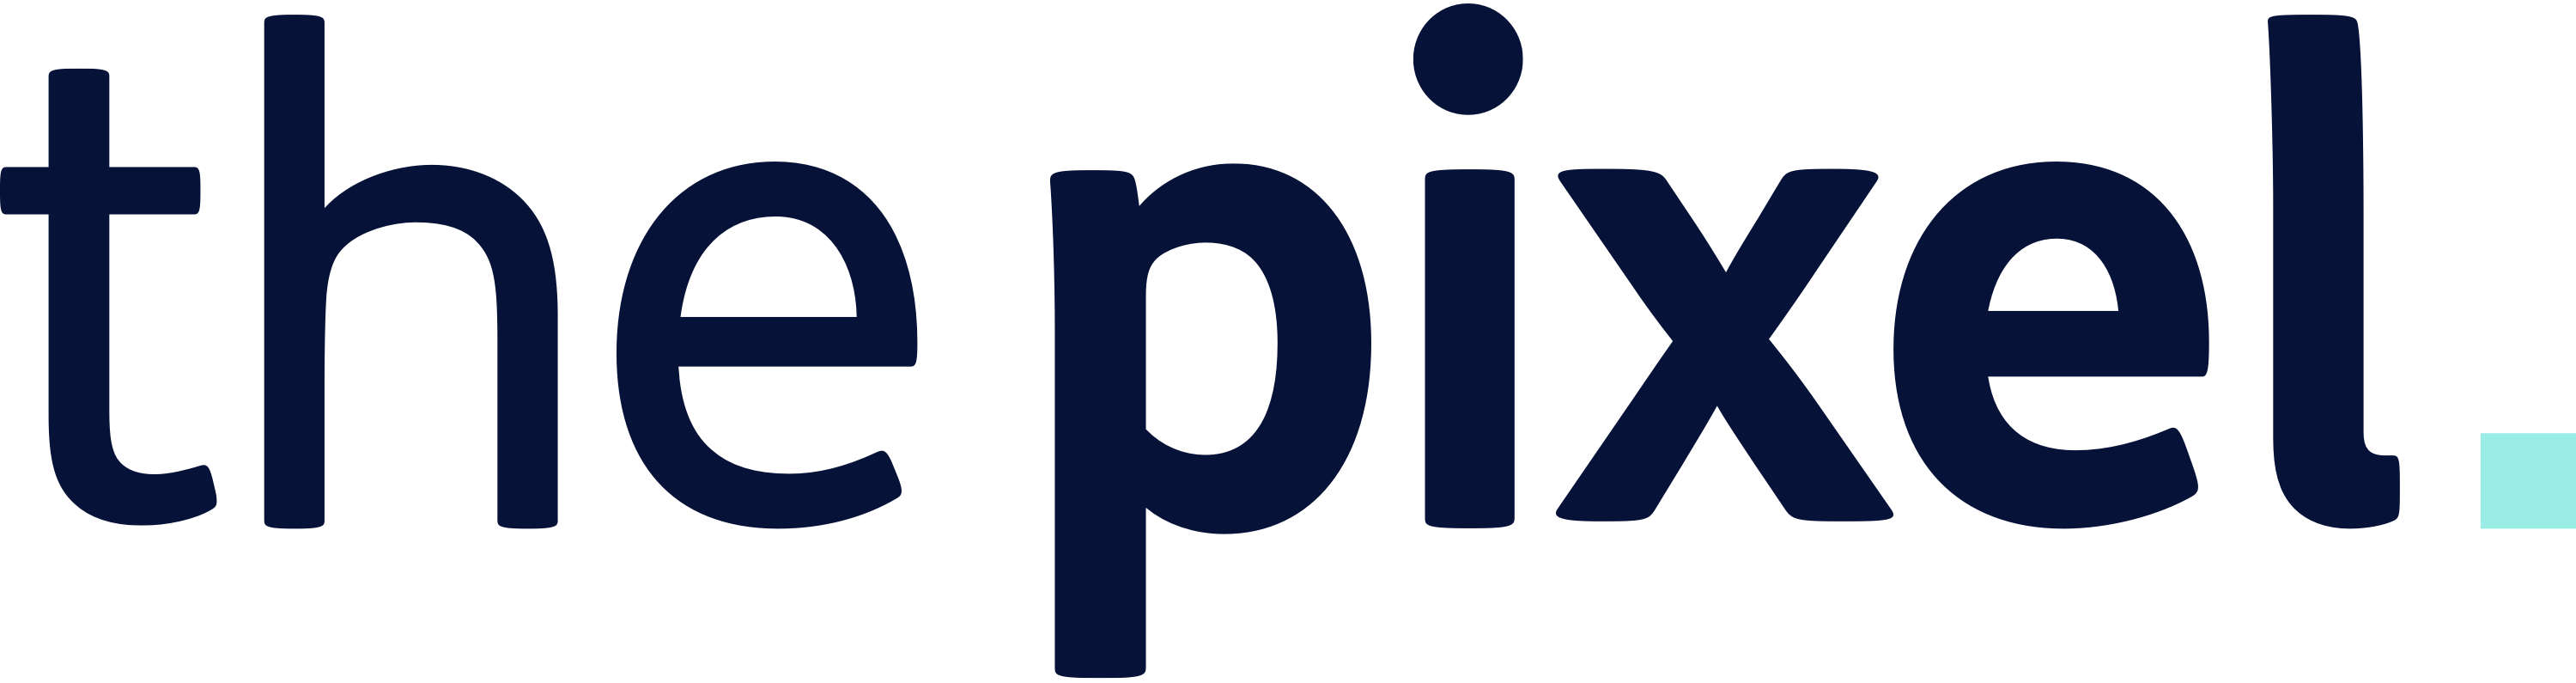 logo for The Pixel